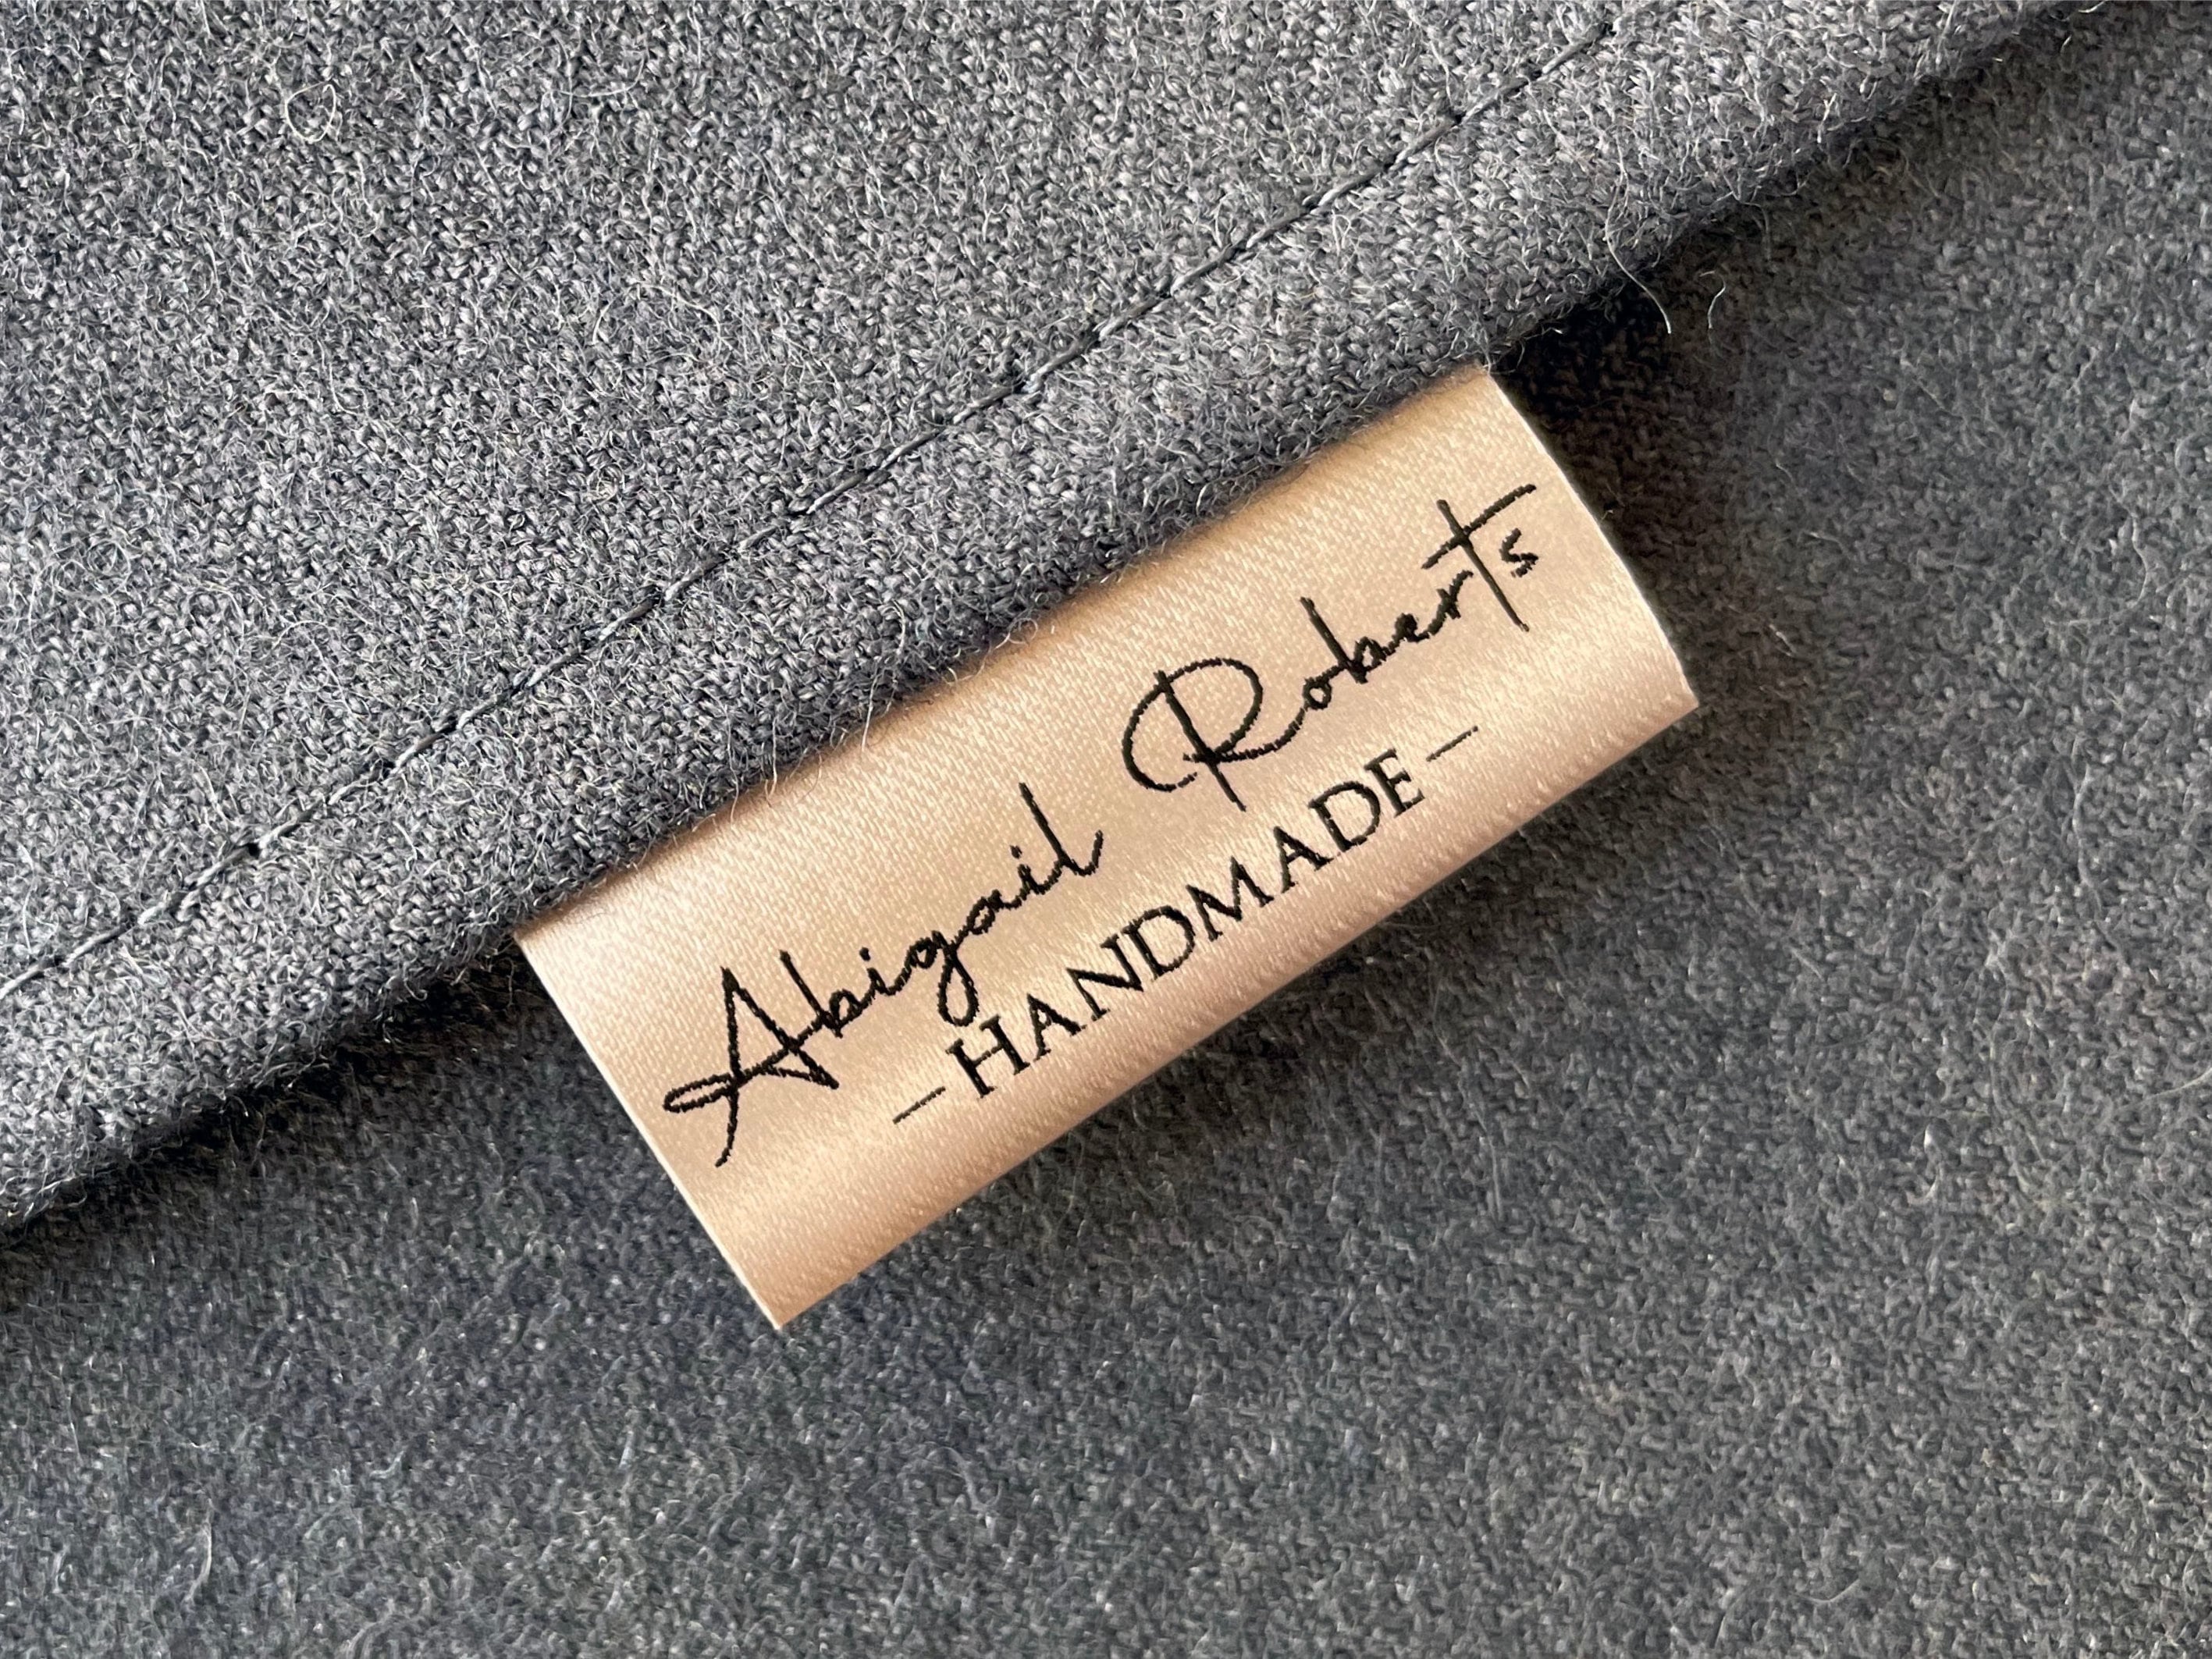 Personalized Labels for Hand Made Items, Cotton Tags for Blankets